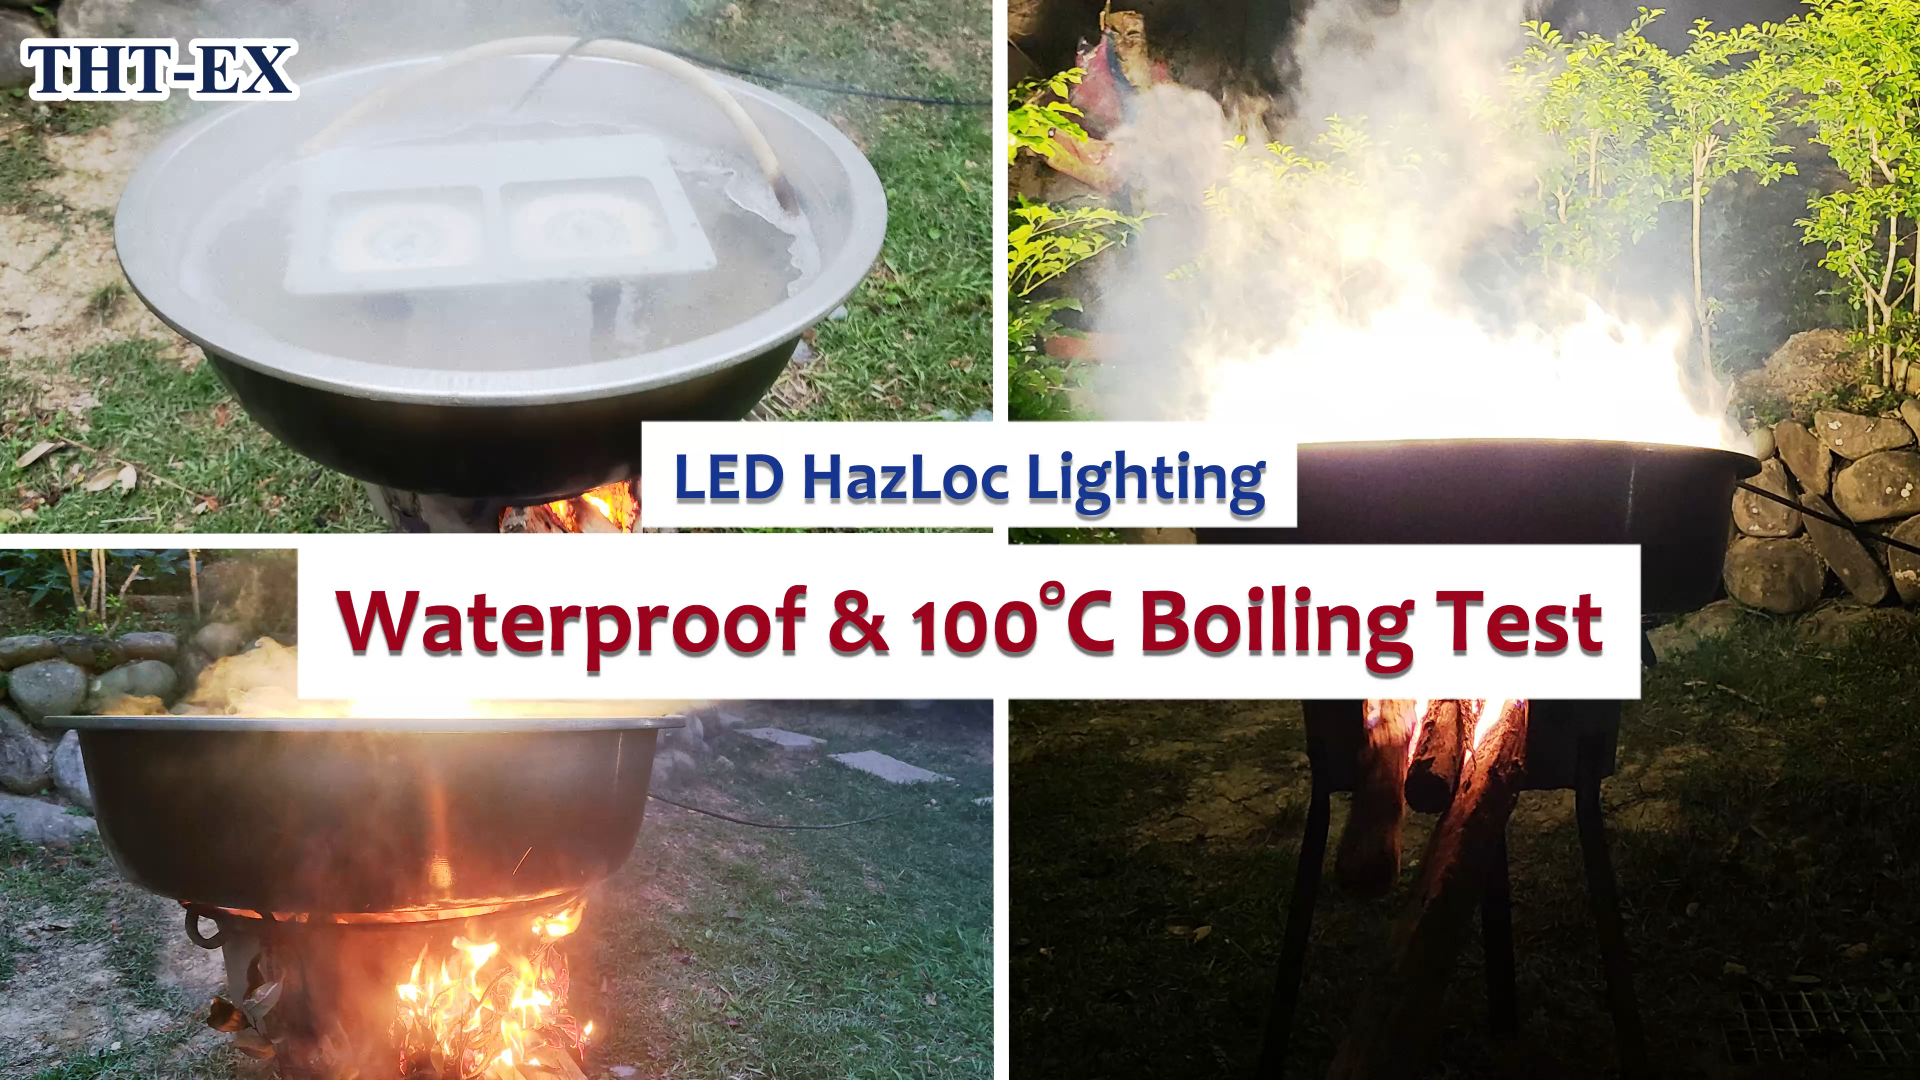 High Temperature 100°C (212°F) Boiling Test for 300W Hazardous Location LED Lighting!